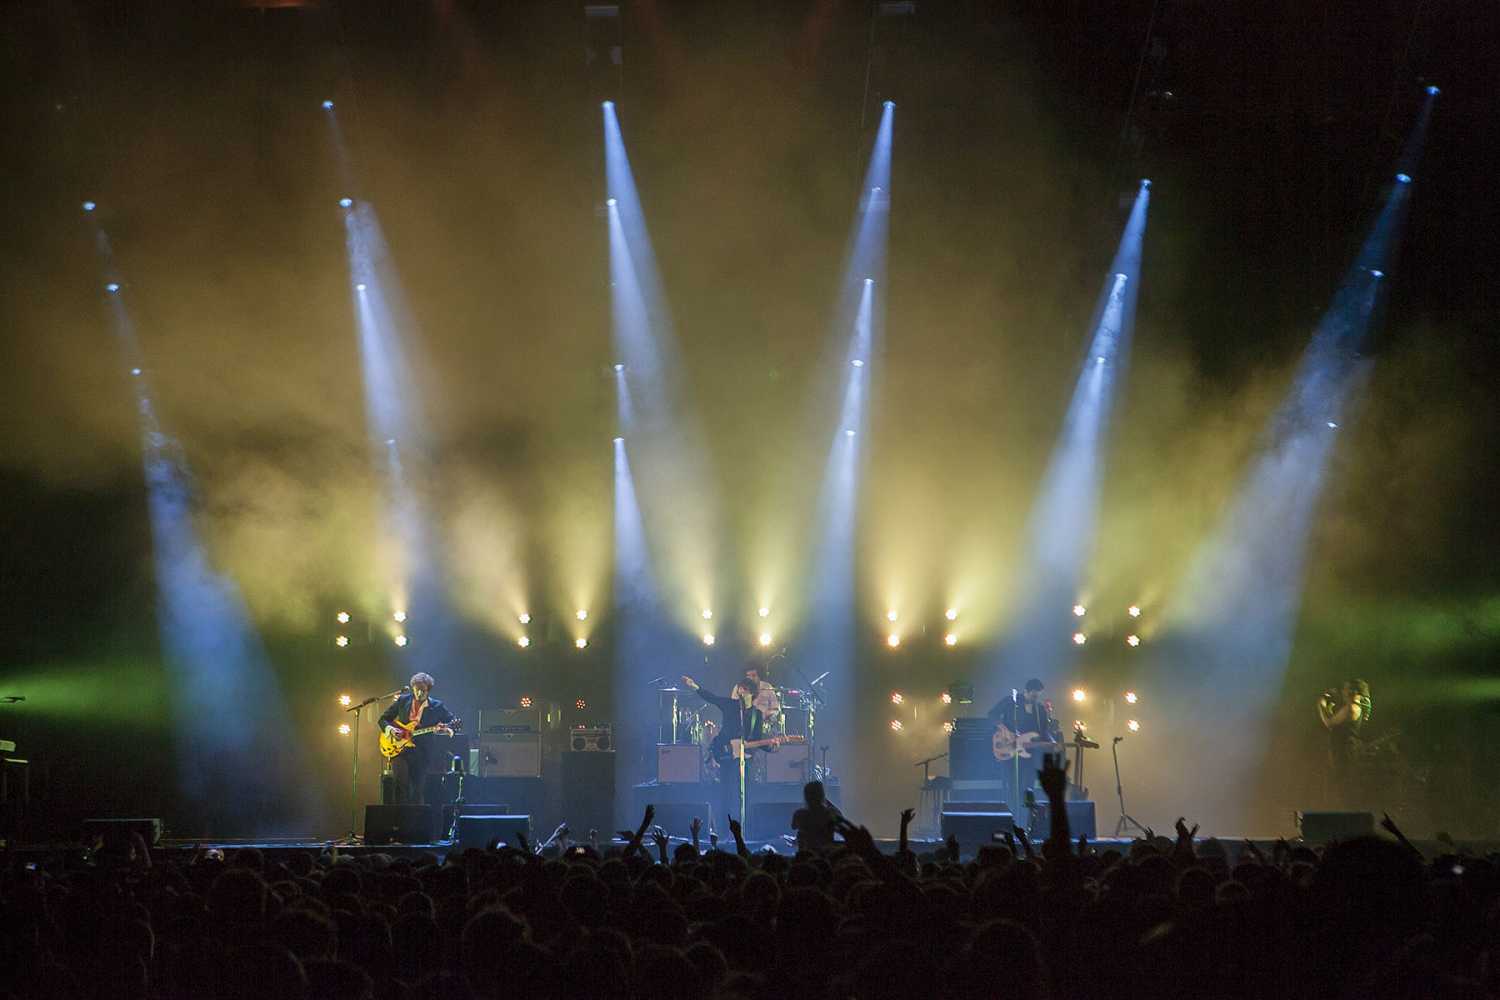 This UK leg of the tour closed with a high-profile gig at London’s Alexandra Palace (photo: Lindsay Cave @ Loosplat)